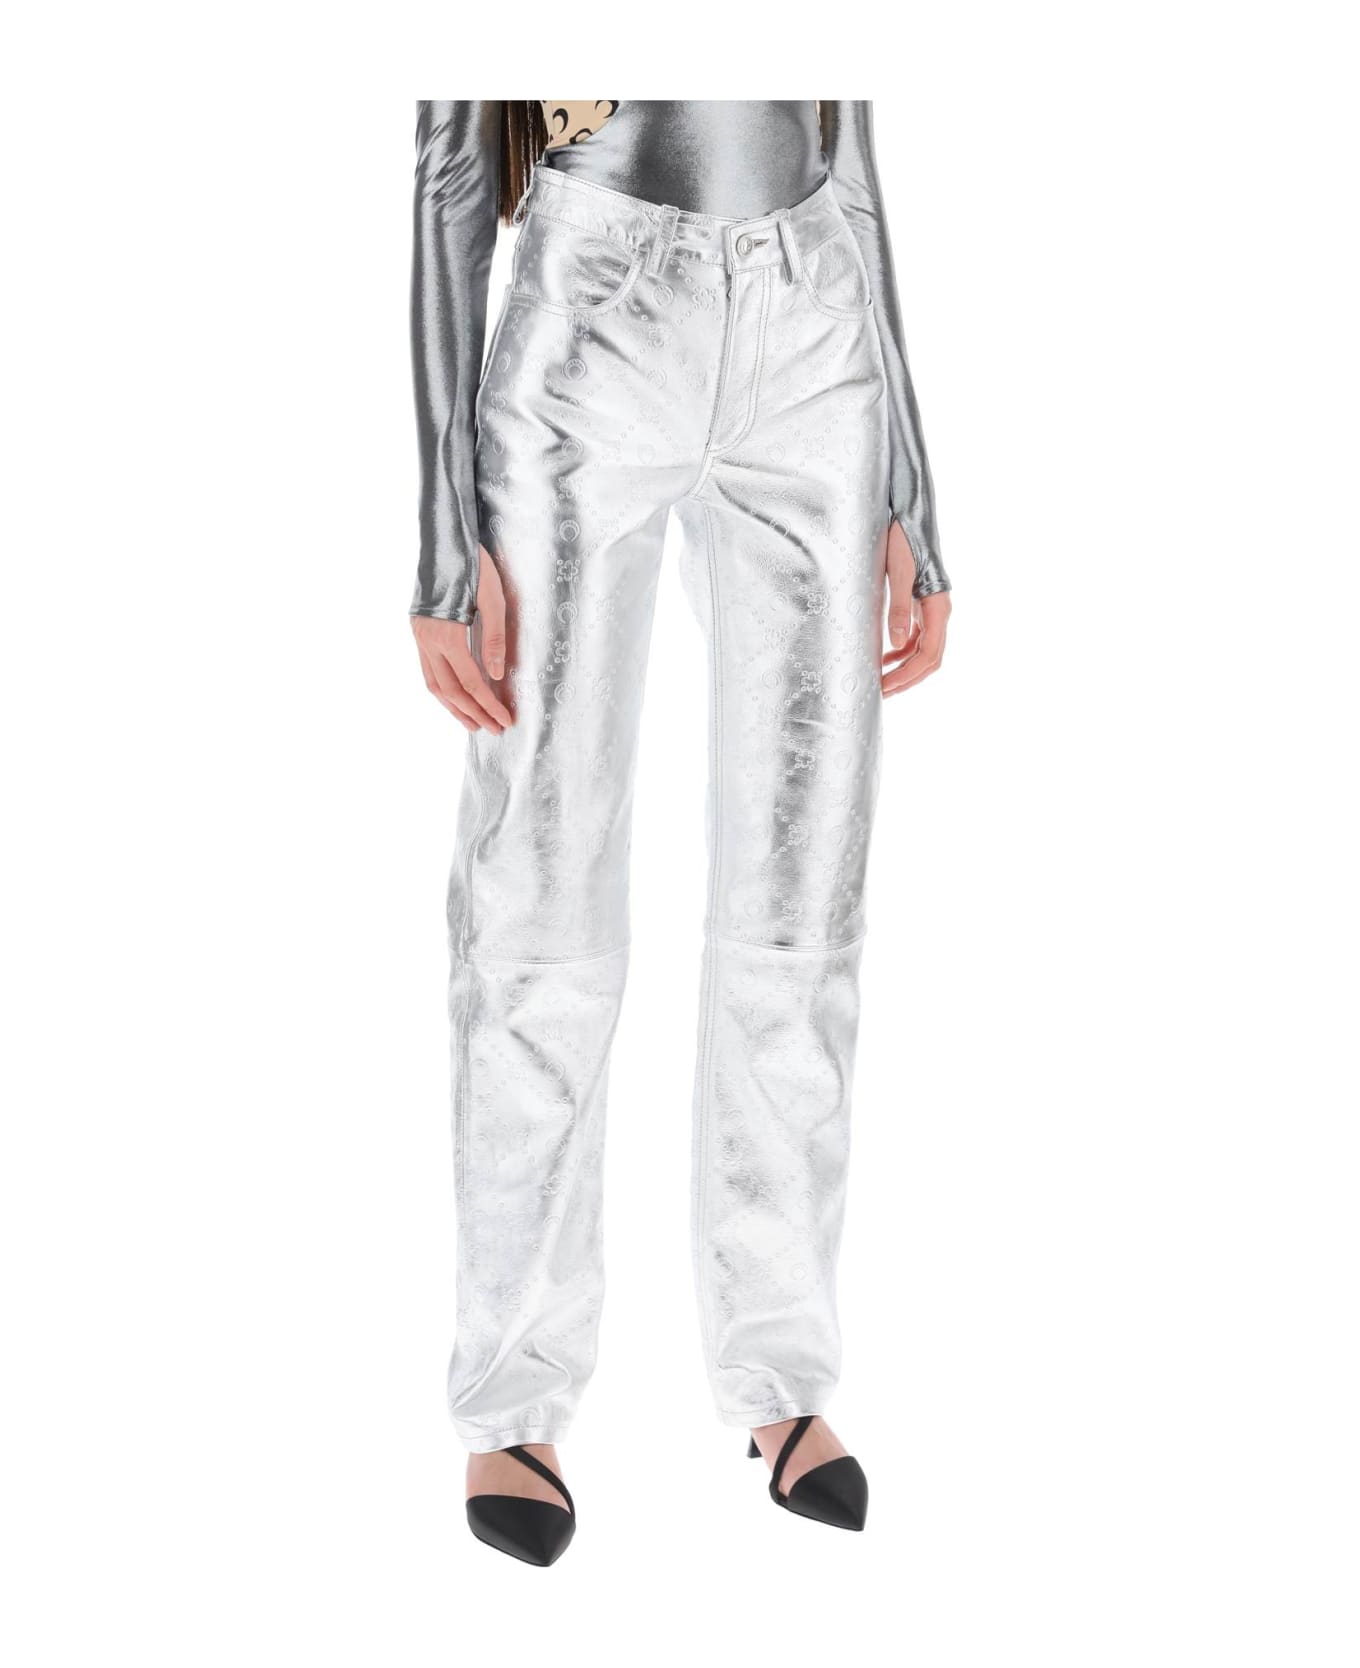 Marine Serre Moonogram Pants In Laminated Leather - SILVER (Silver) ボトムス